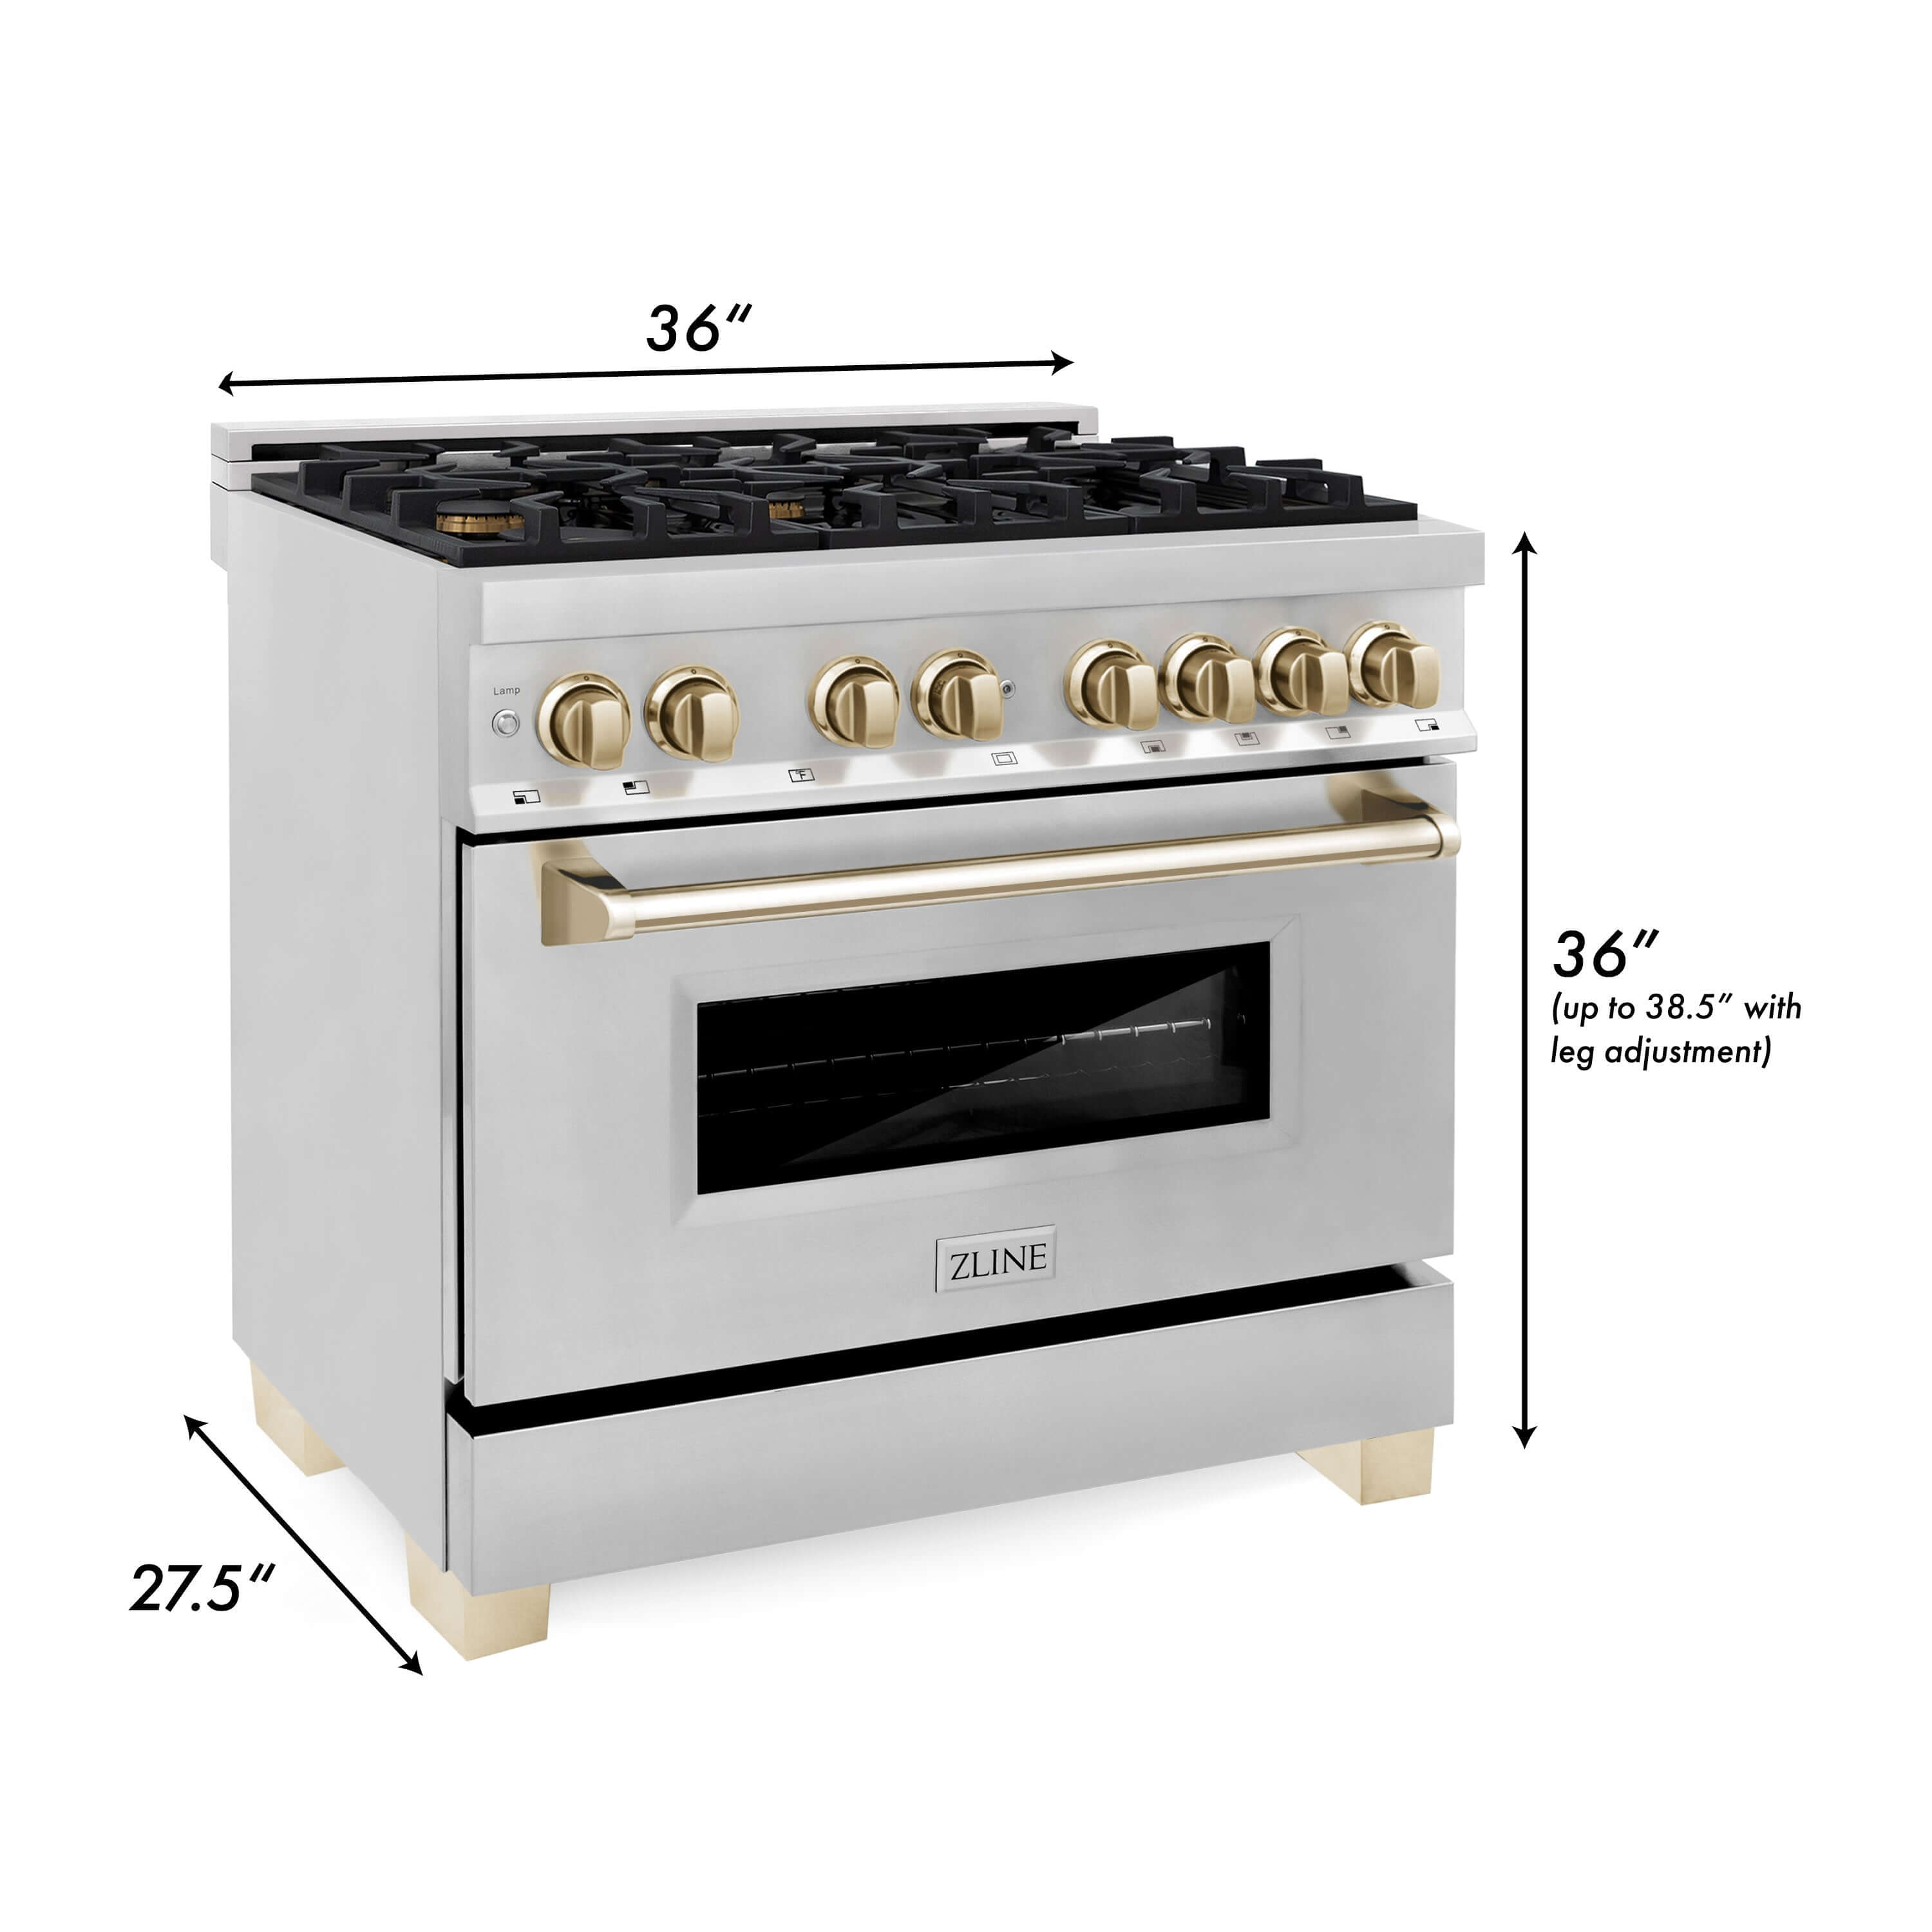 ZLINE Autograph Edition 36 in. Kitchen Package with Stainless Steel Dual Fuel Range, Range Hood and Dishwasher with Polished Gold Accents (3AKP-RARHDWM36-G) dimensional diagram with measurements.